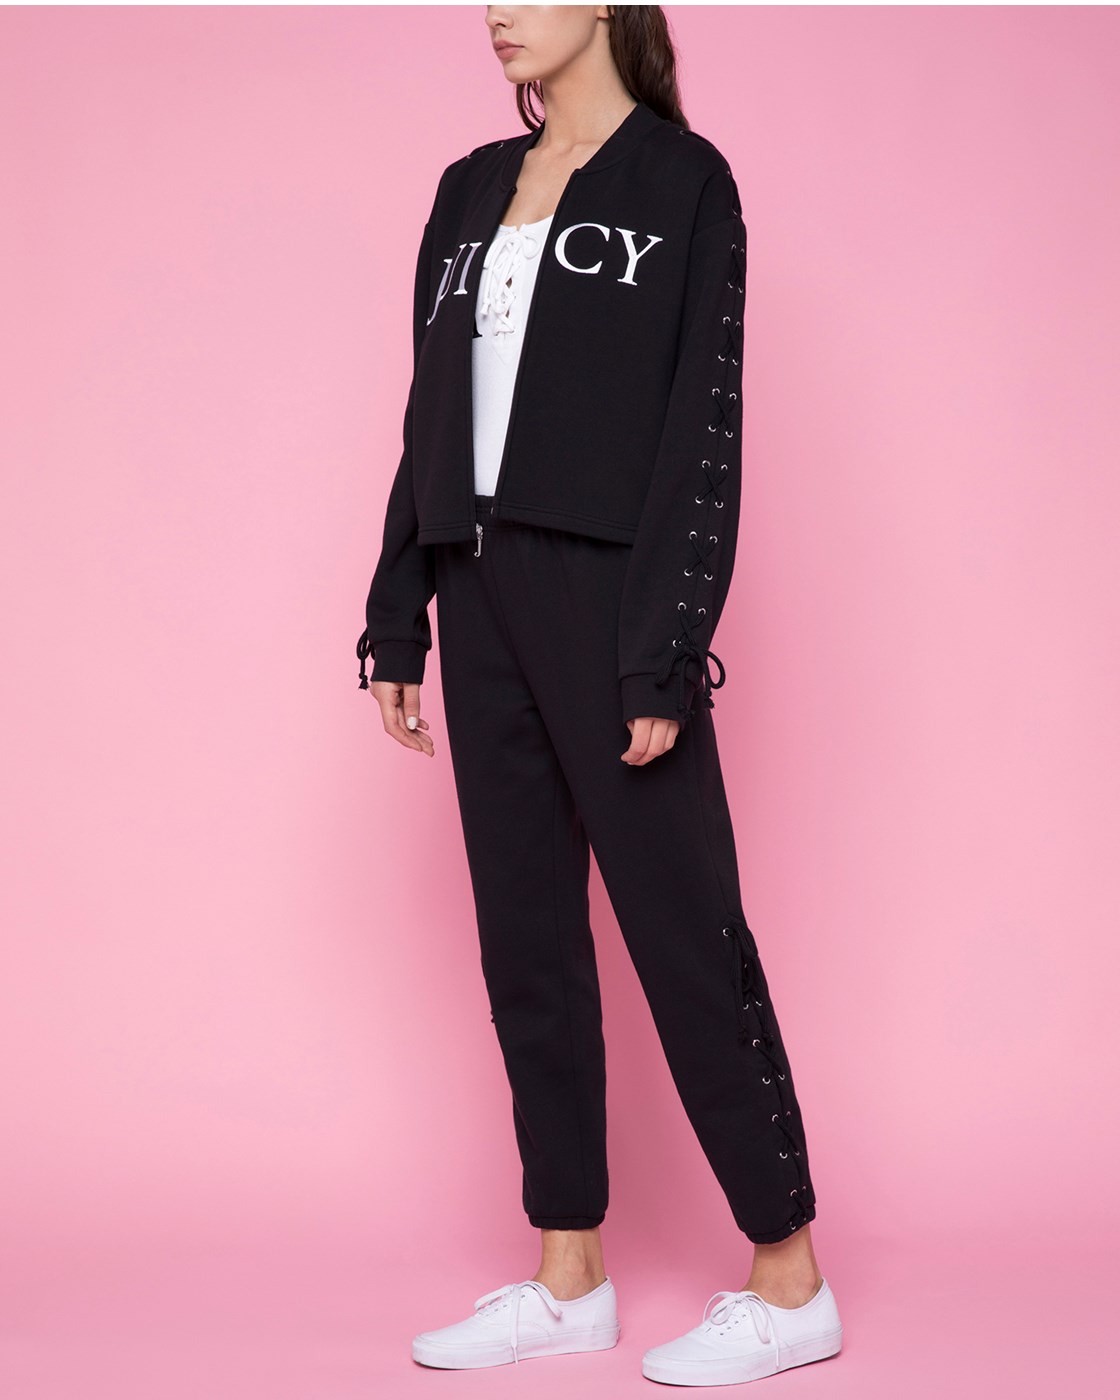 Juicy Couture Fleece Lace Up Bomber Jacket